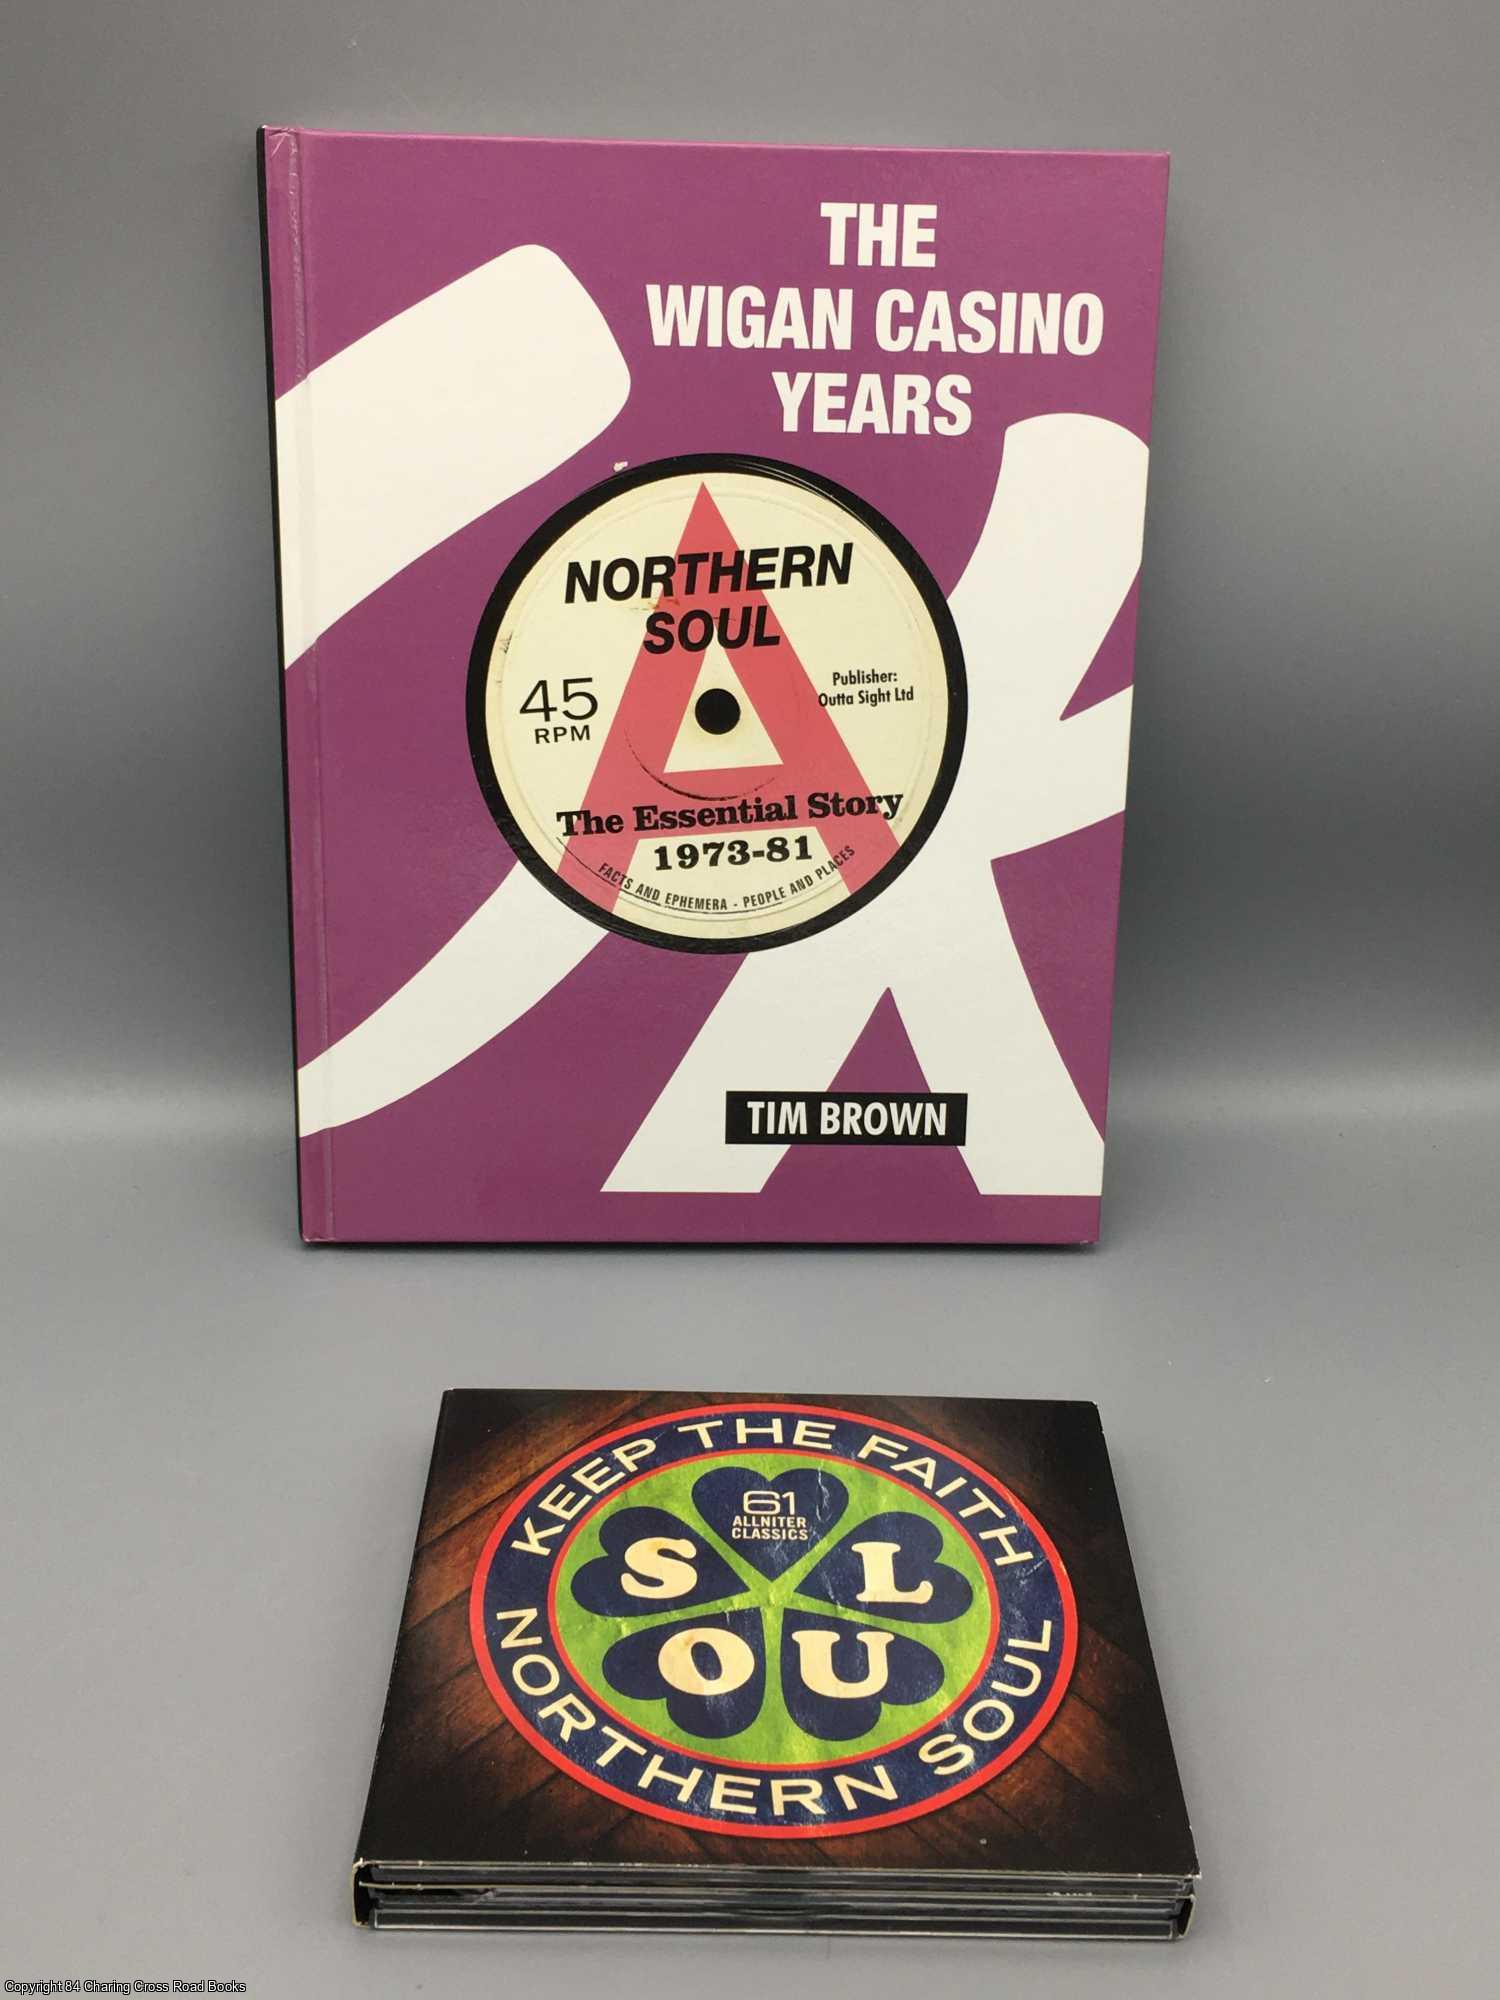 Brown, Tim - The Wigan Casino Years: Northern Soul The Essential Story 1973-81